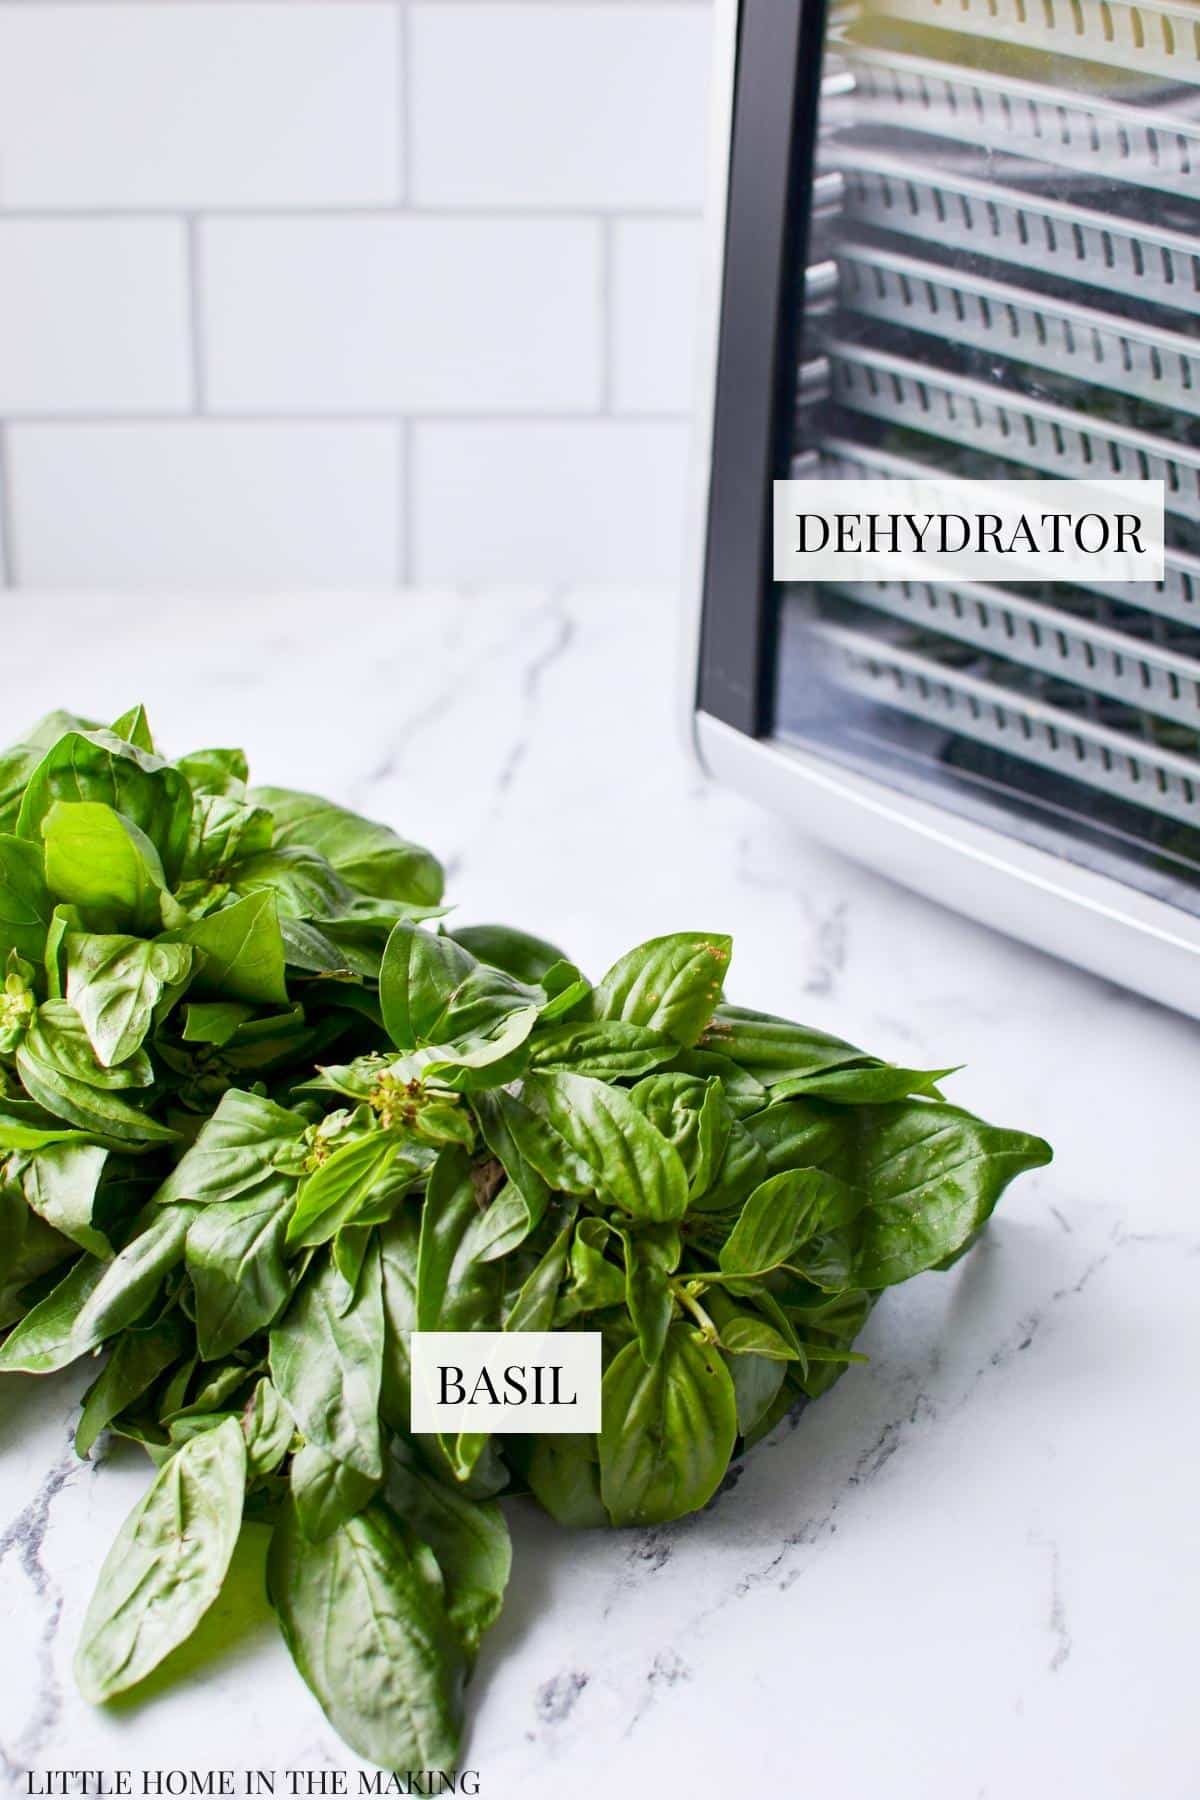 A bunch of basil with a dehydrator in the background.